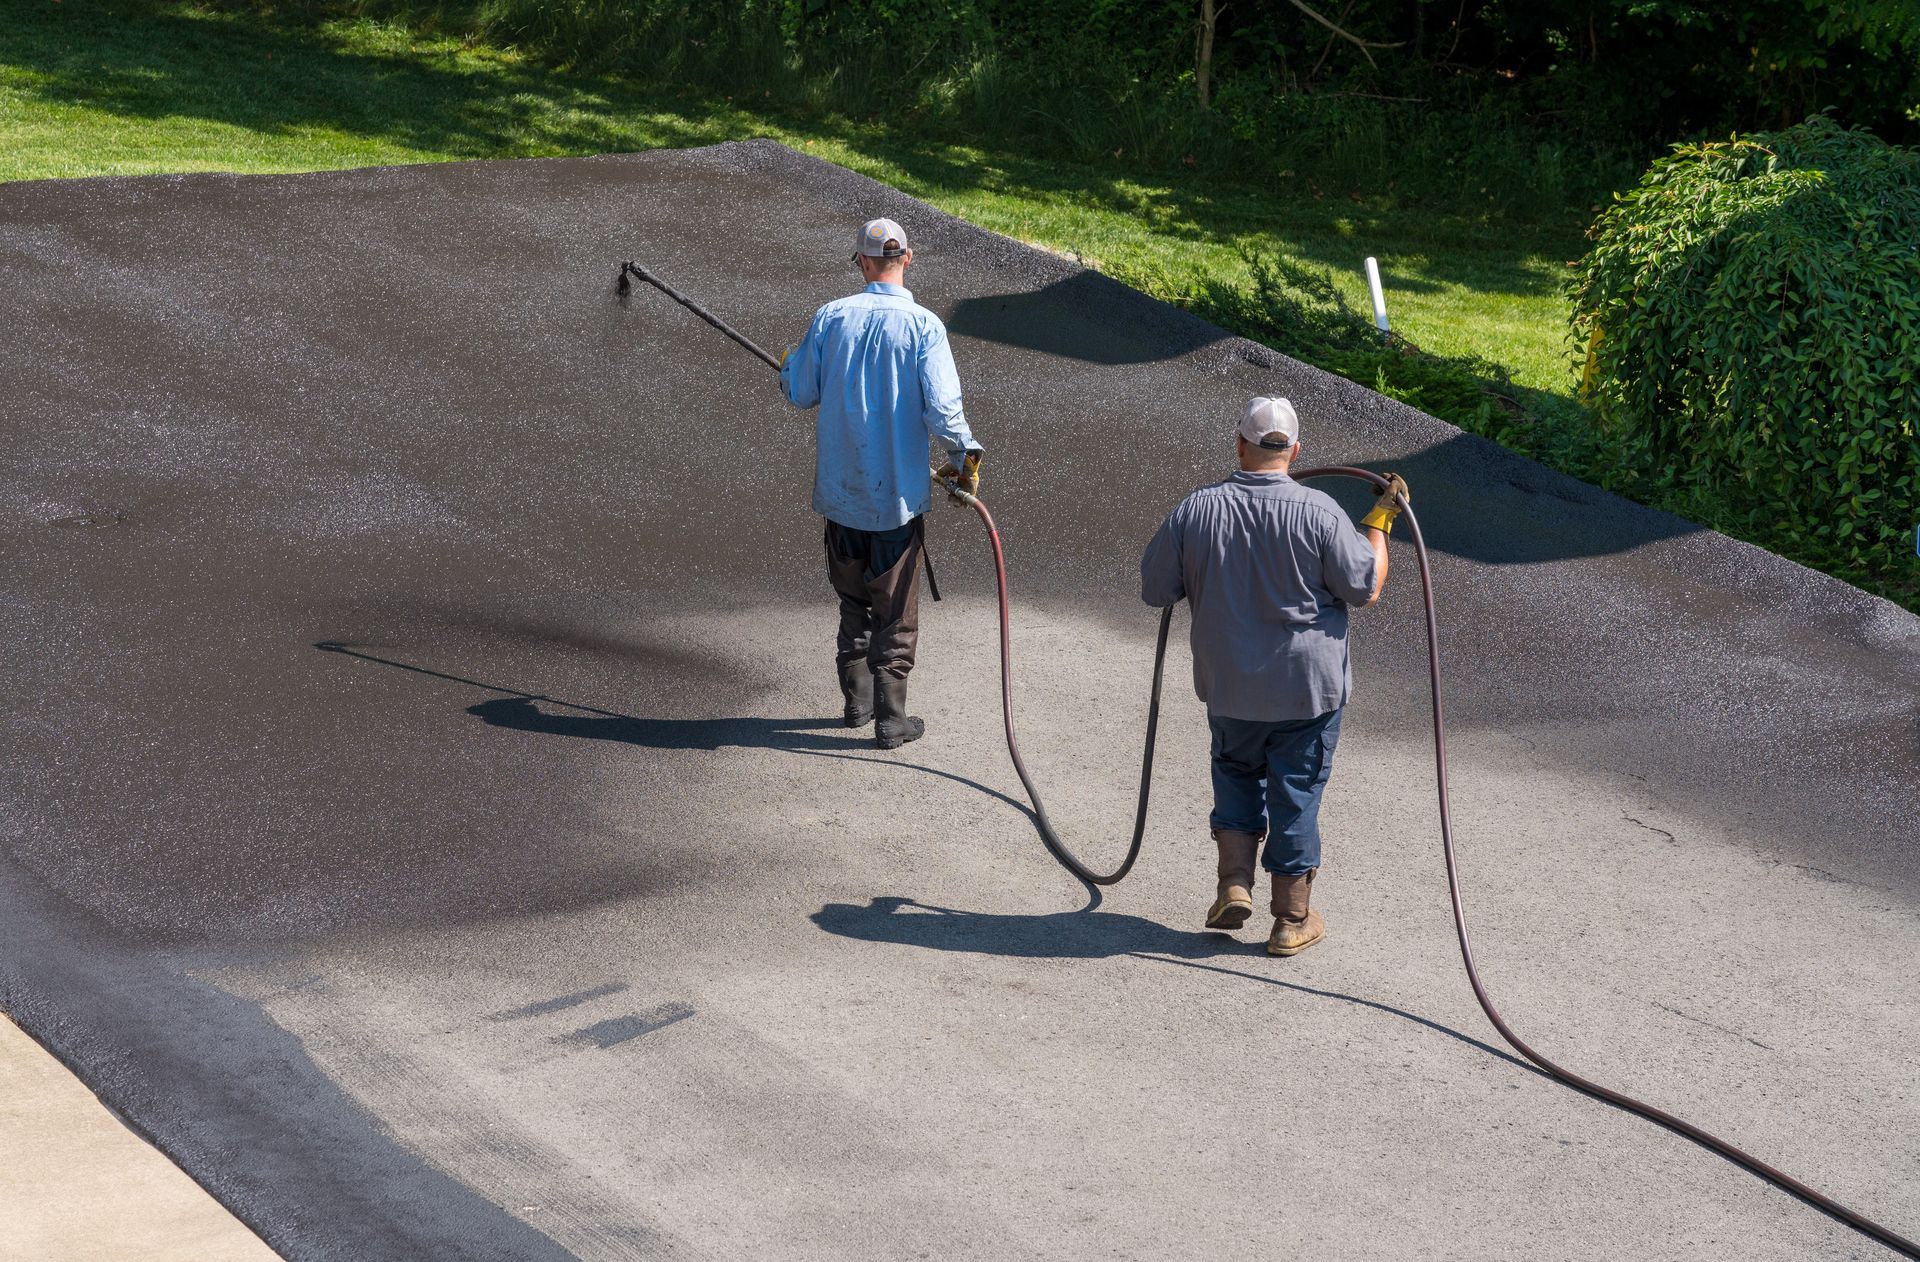 Workers applying blacktop sealer to asphalt street using a spray to provide a protective coat against the elements.